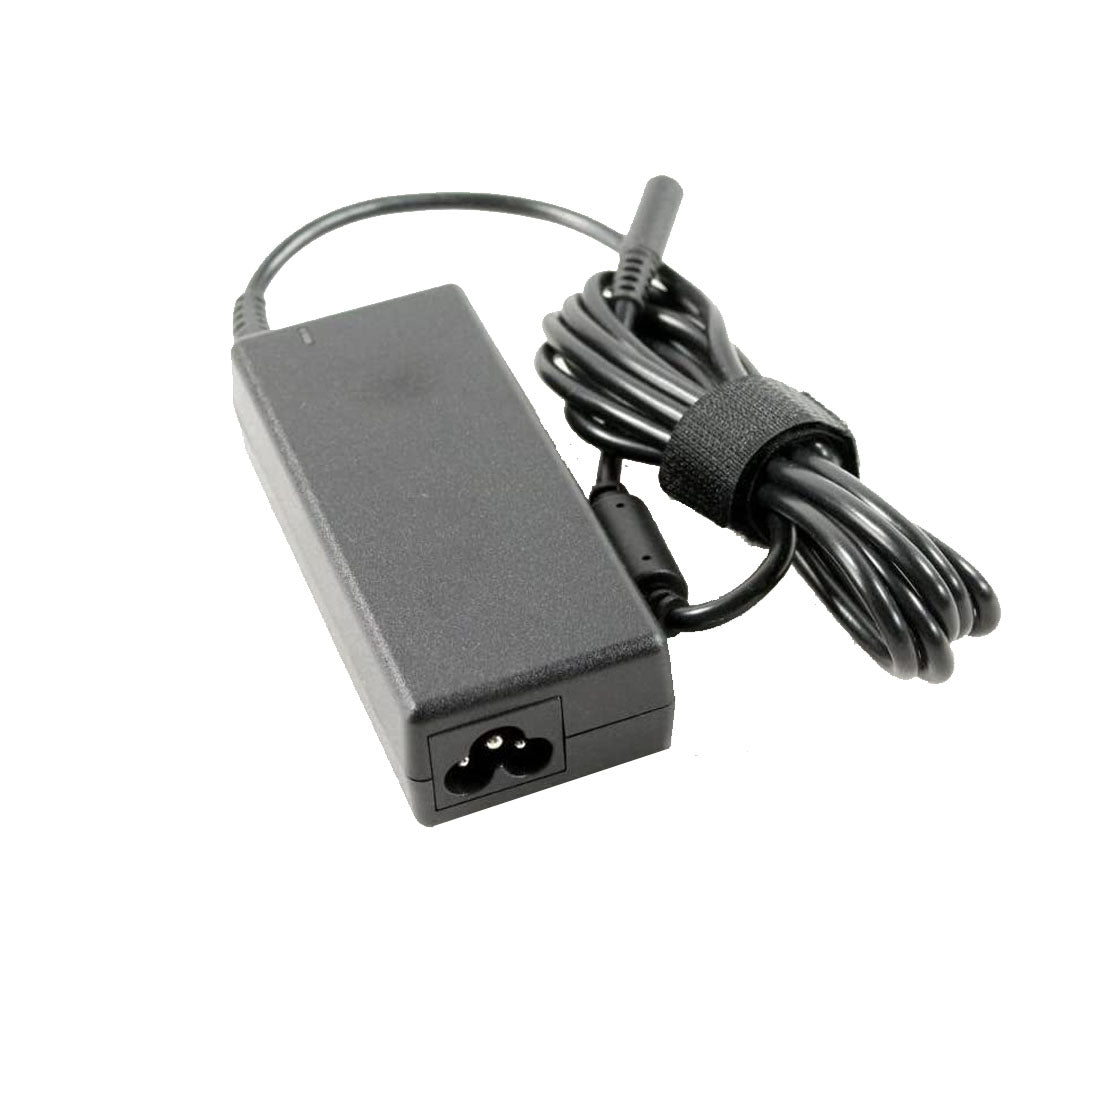 Dell Original 65W 19.5V 4.5mm Pin Laptop Charger Adapter for Inspiron 14 3459 With Power Cord